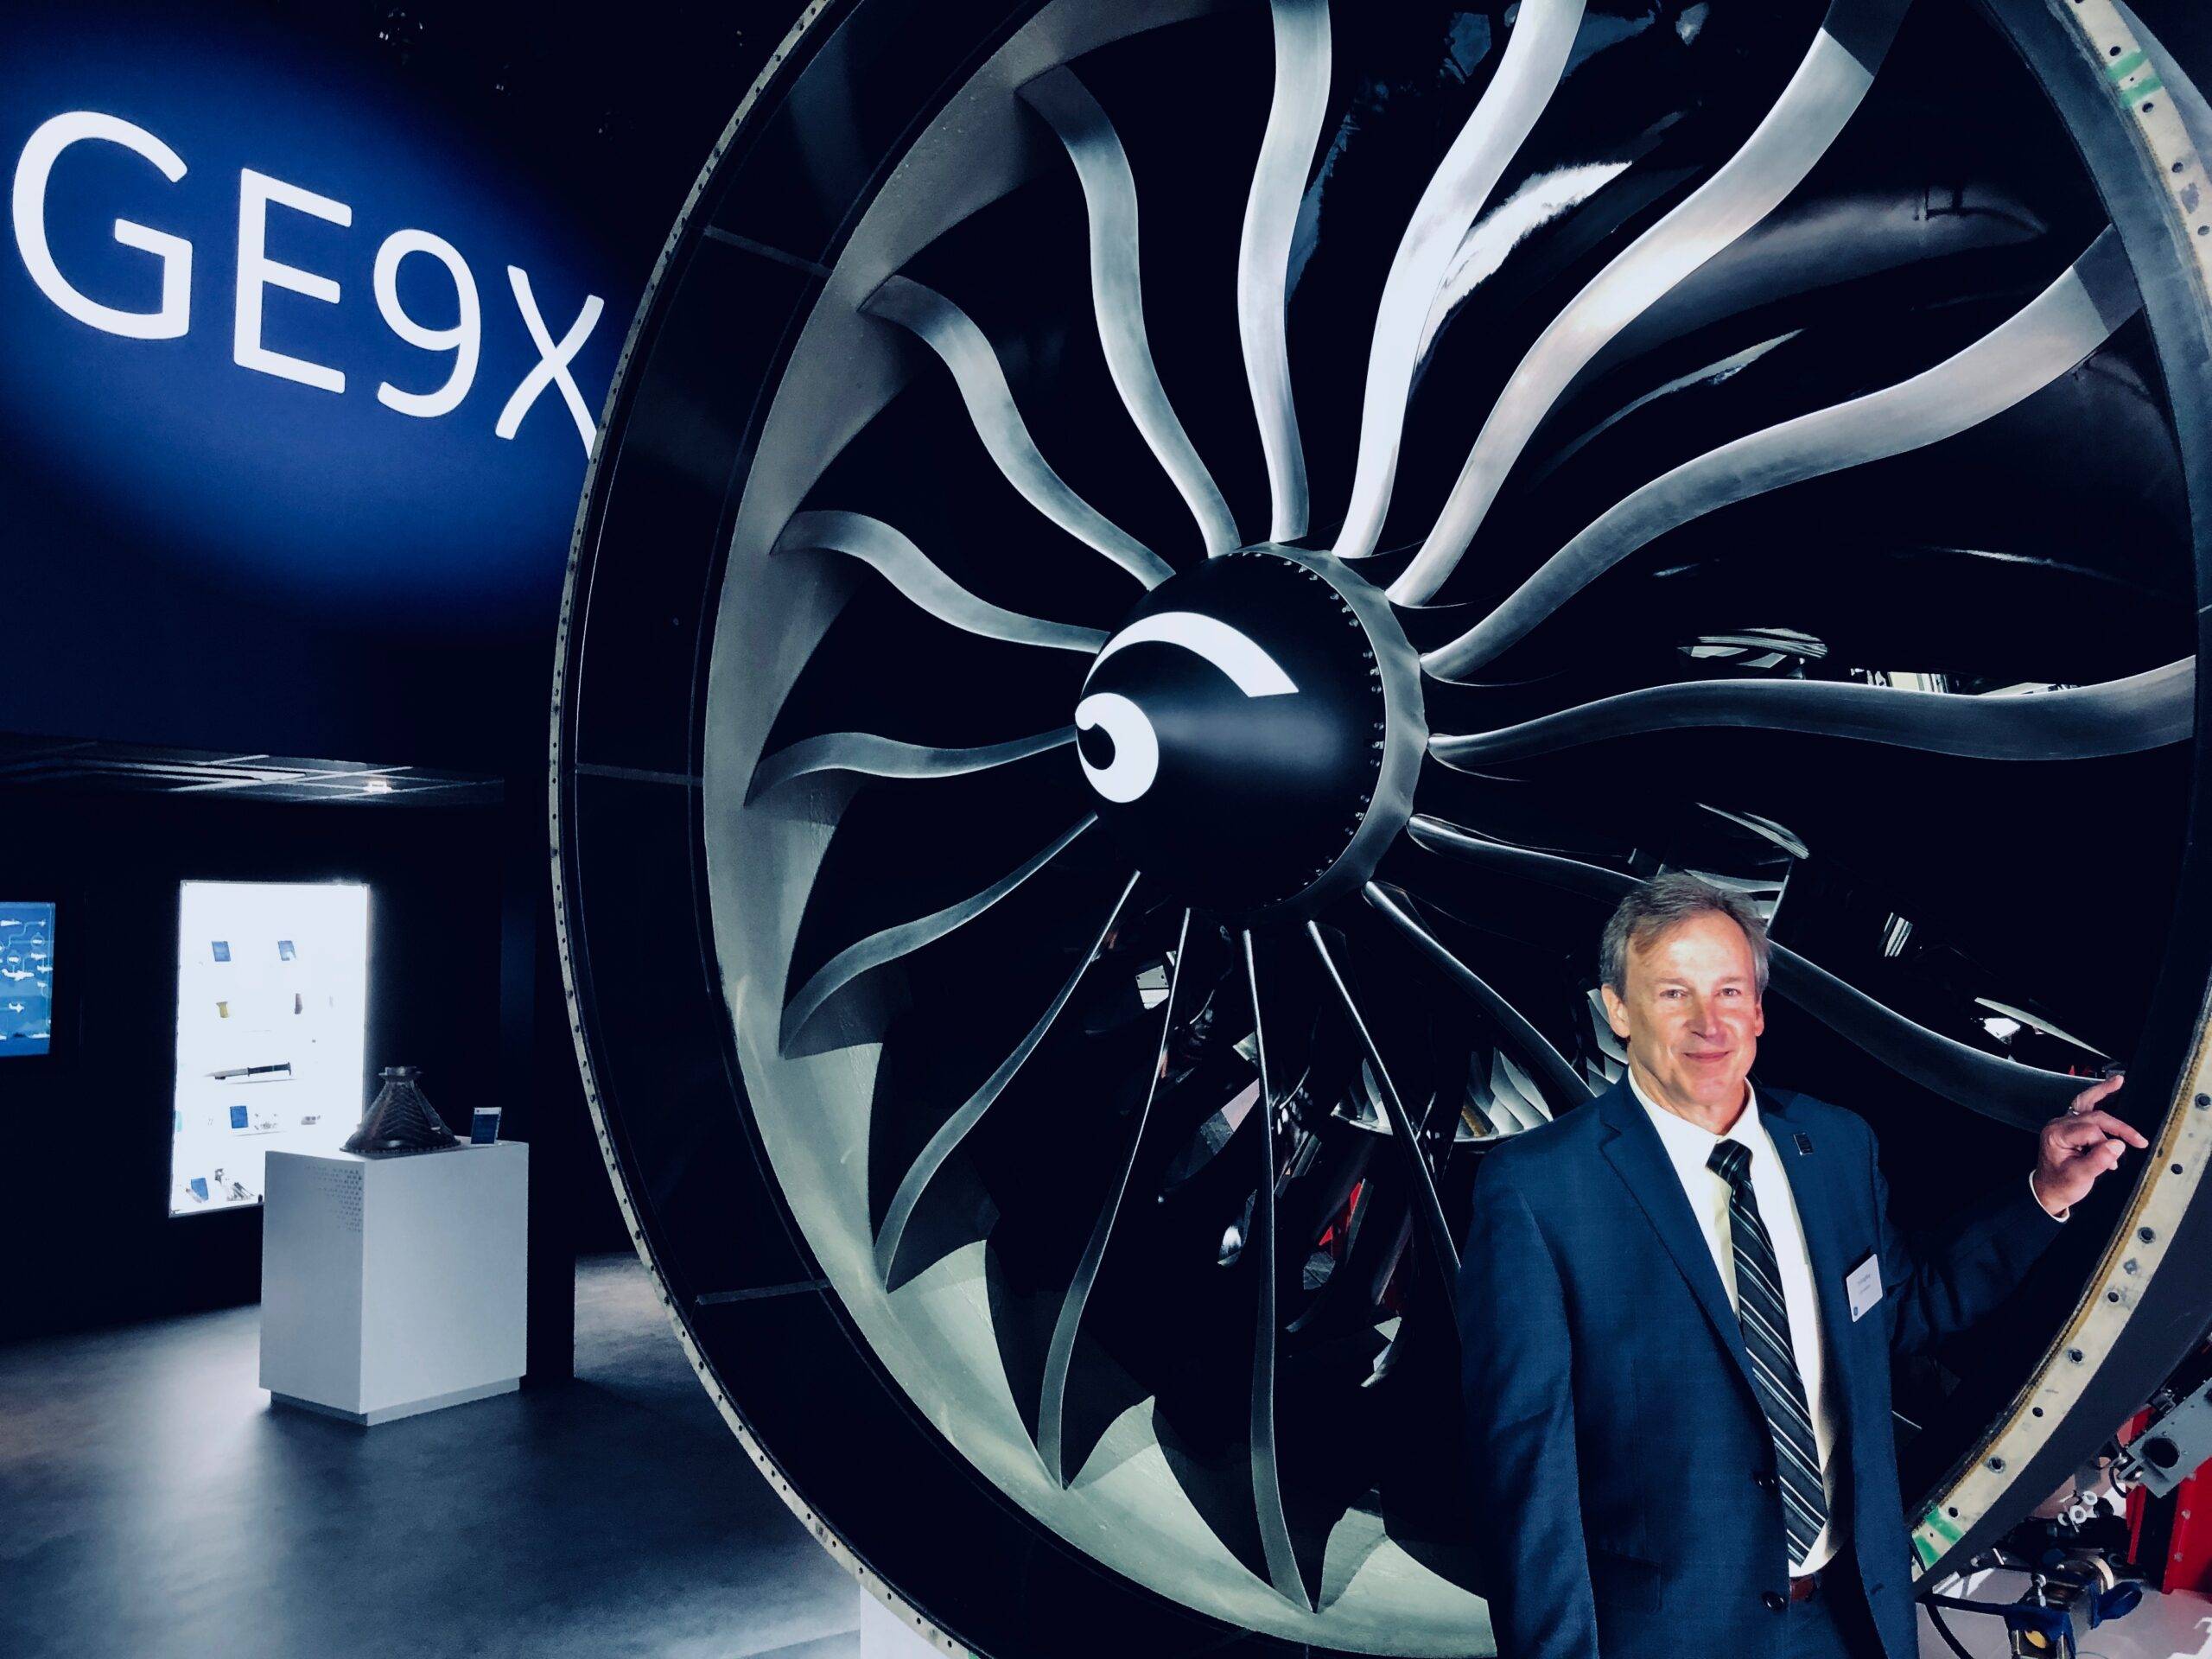 Image credit: Alex Schroff for GE Reports. Ted Ingling, the general manager for the GE9X engine program, unveiled the GE9X jet engine at the Paris Air Show on Monday. Image credit: Tomas Kellner for GE Reports.